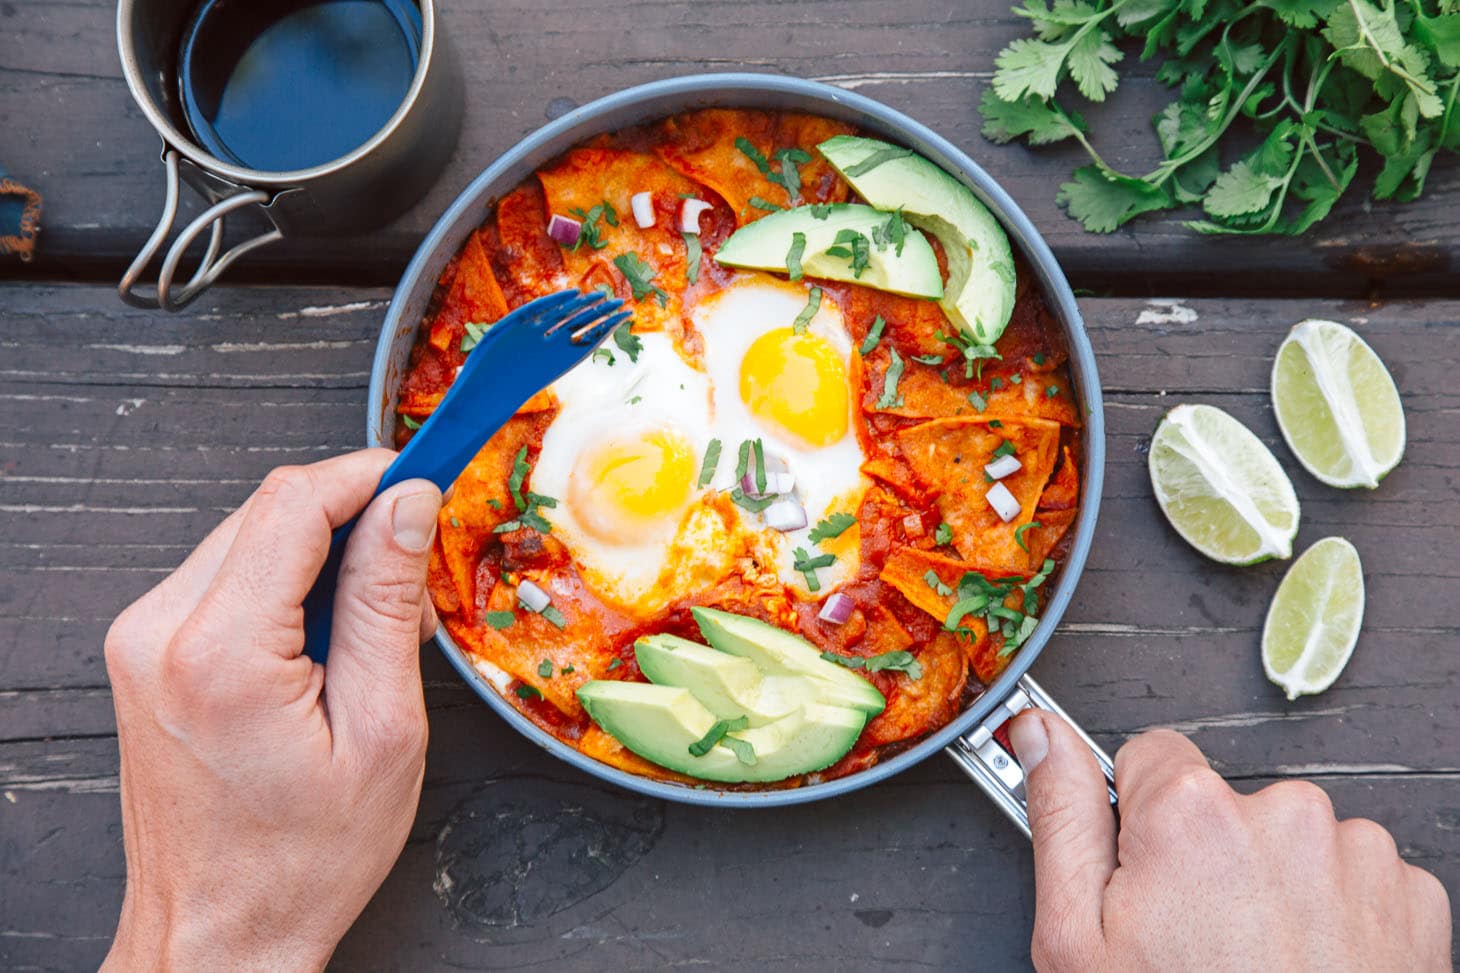 Chilaquiles is an easy camping breakfast idea - crispy tortillas simmered in a spicy tomato sauce and topped with eggs. It takes less than 30 minutes to make, and it's vegetarian, too!